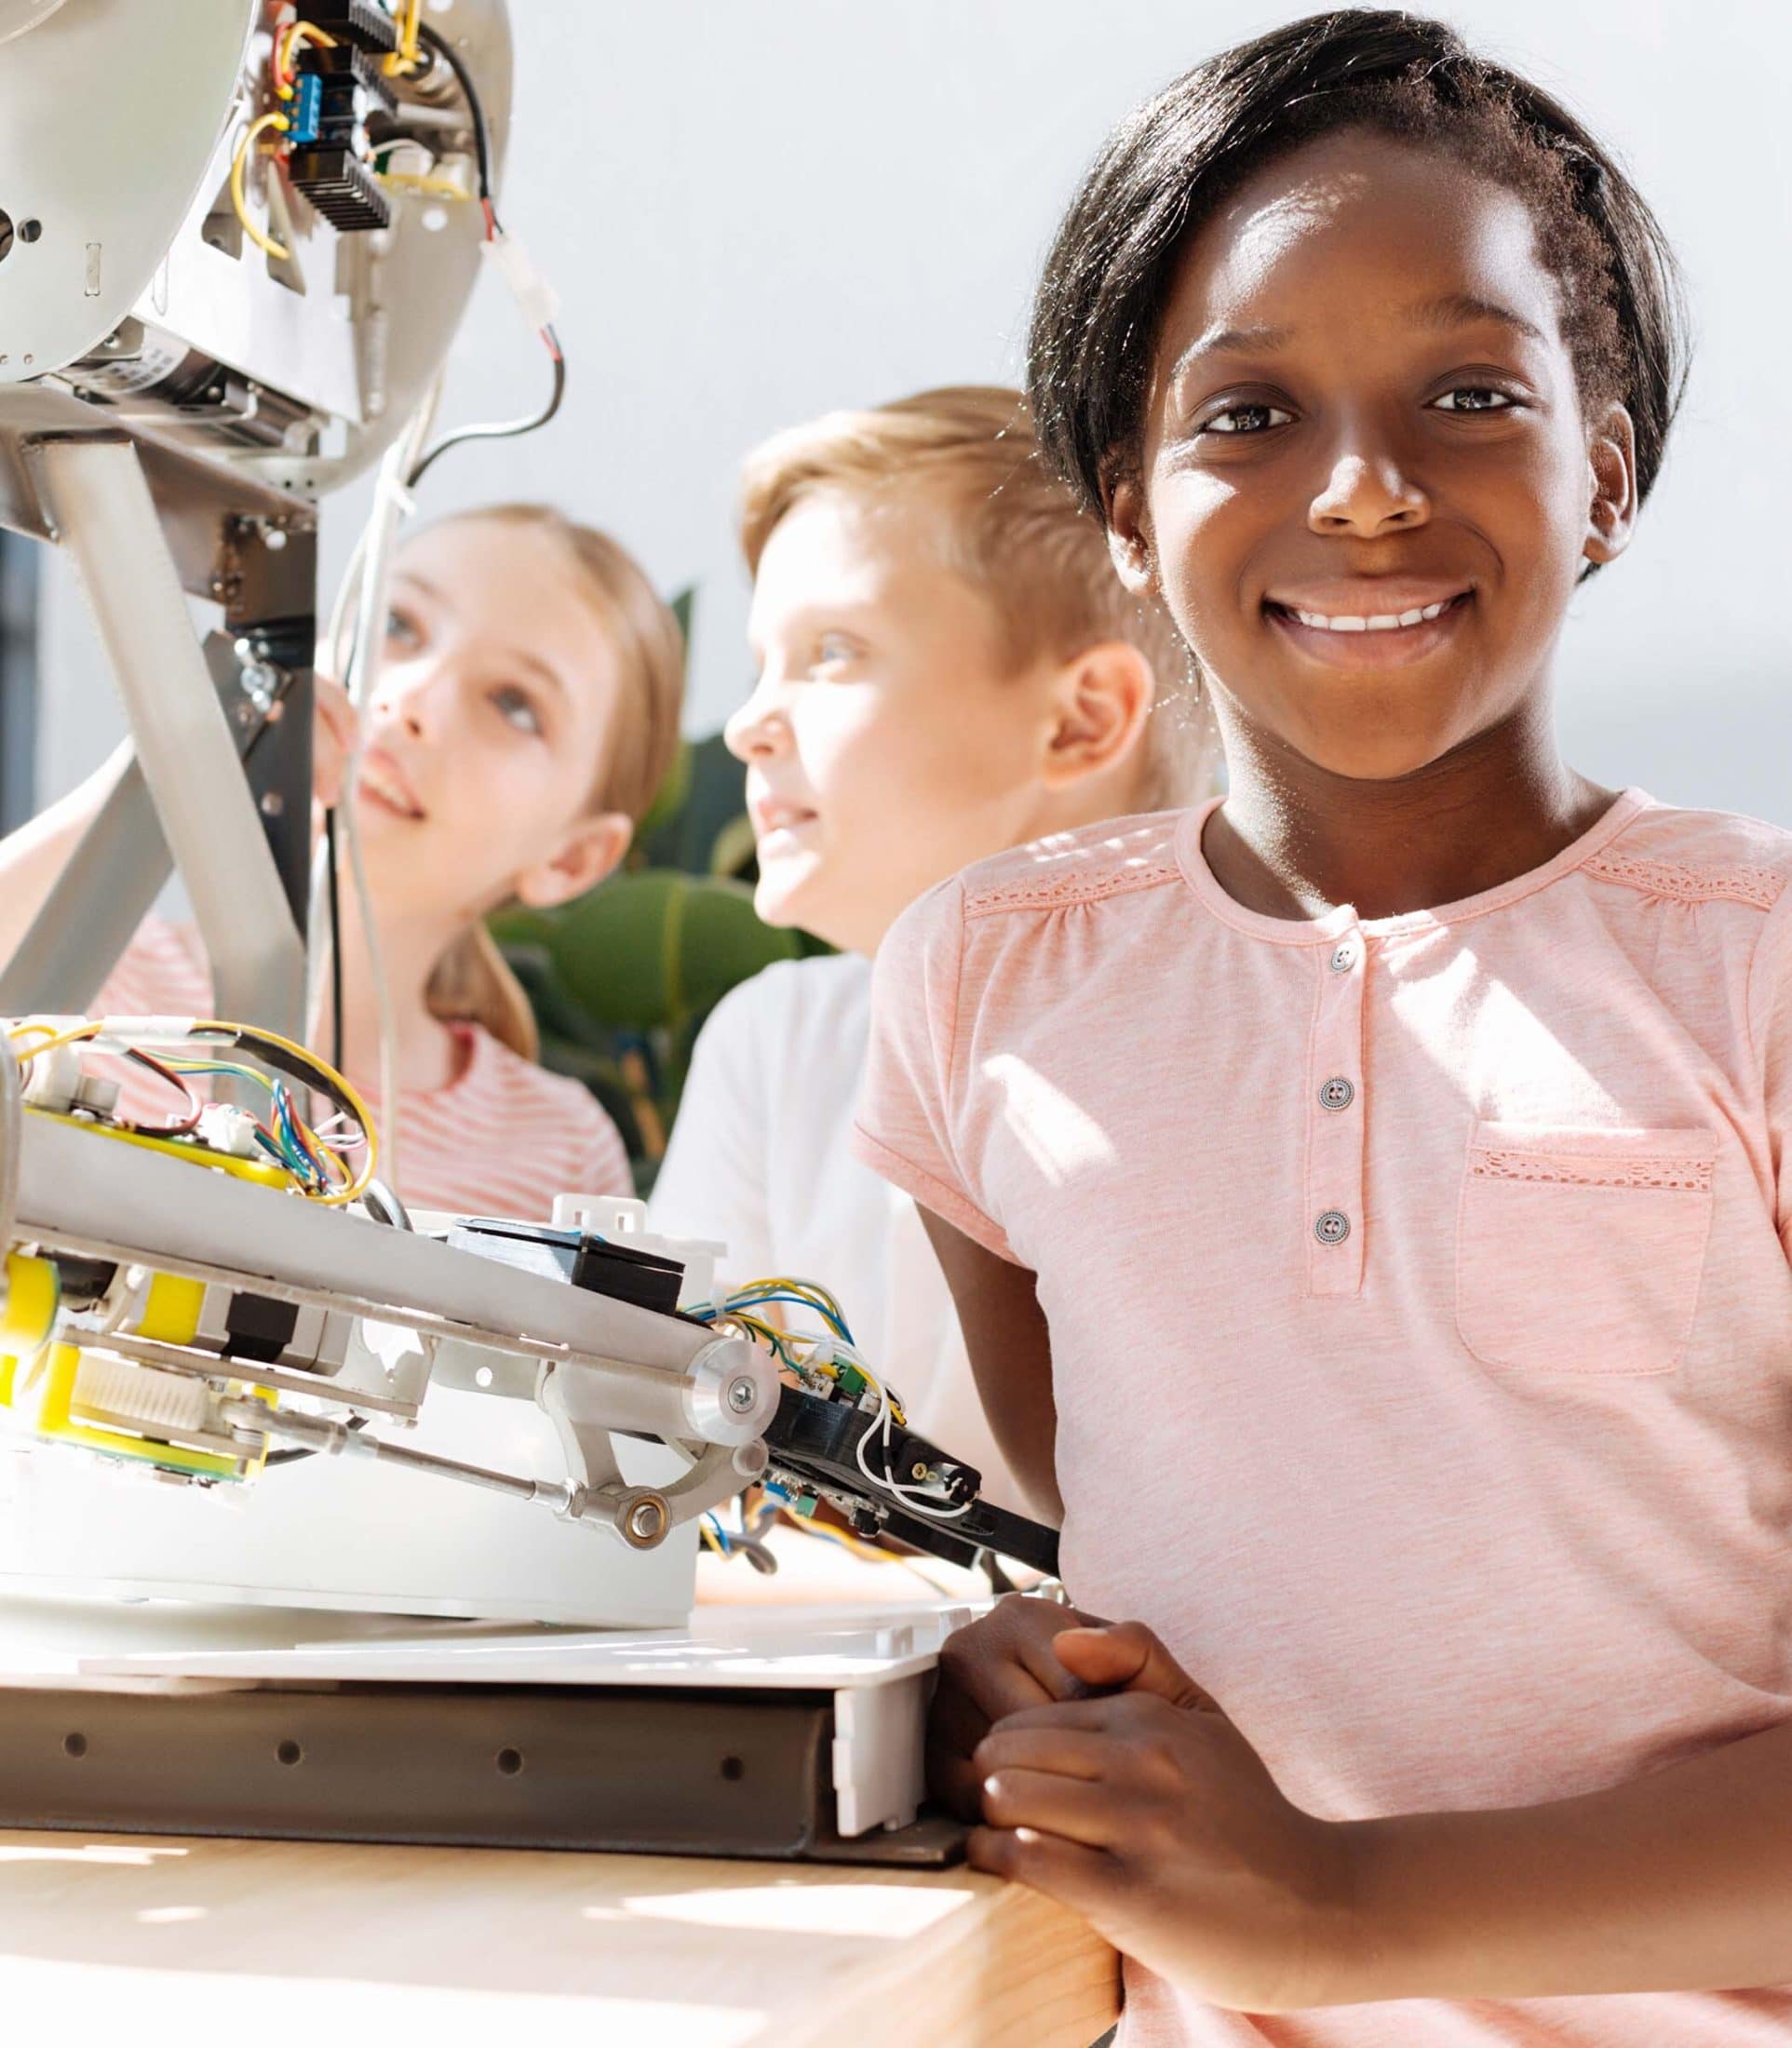 young smiling black girl in a pink shirt working in a robotics lab